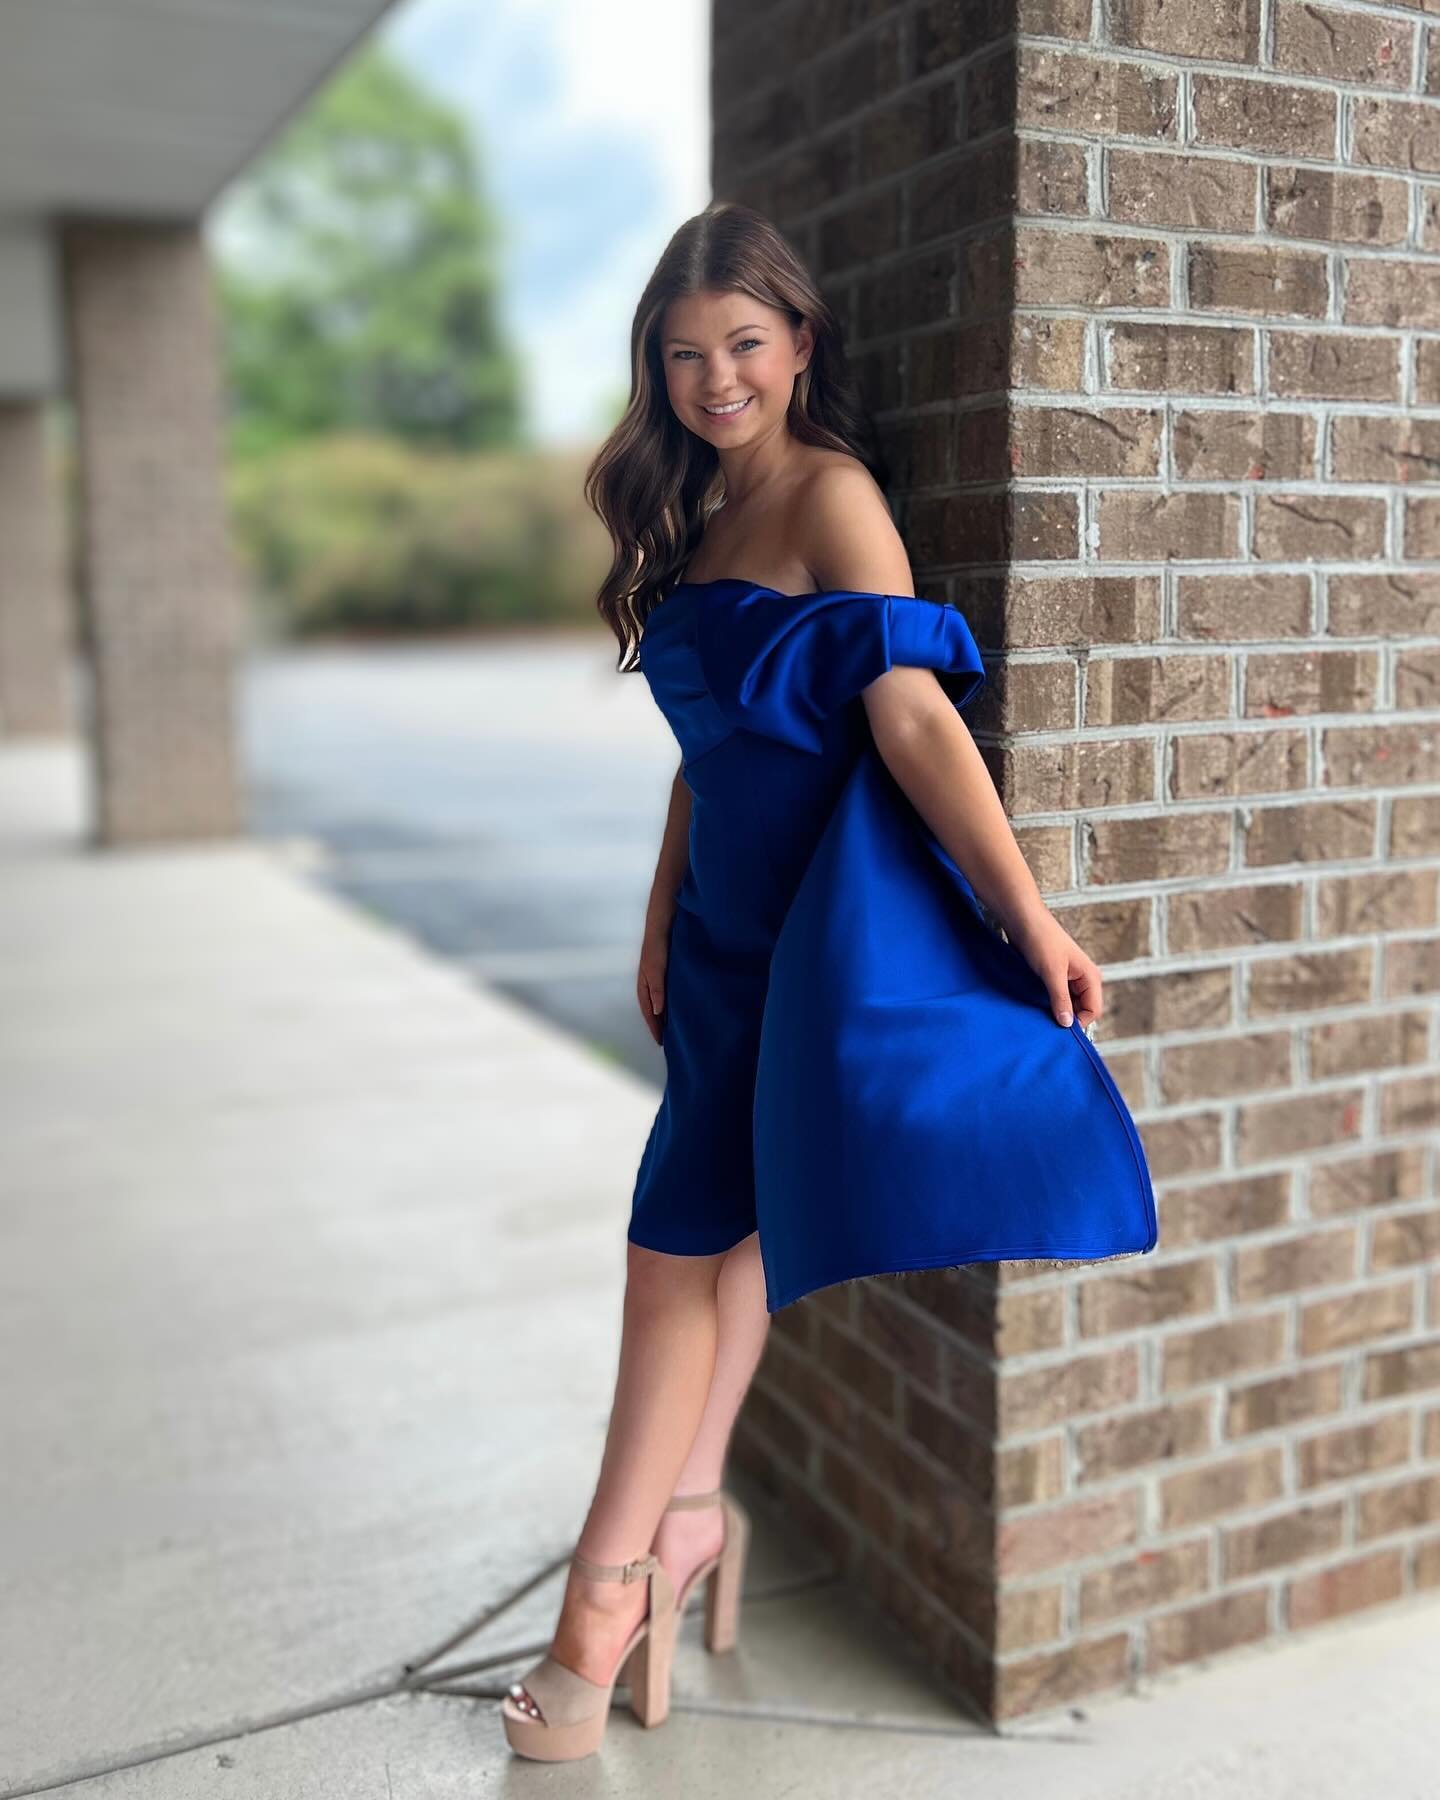 Hey pageant girls! 👑 Still looking for your pageant wardrobe? This stunning @jovanifashions interview dress would be perfect for your next competition!! 💙 Shop now #AATRNC 

#aatrnc #aatr #dresses #dress #fayettevillenc #northcarolina #raleigh #cha